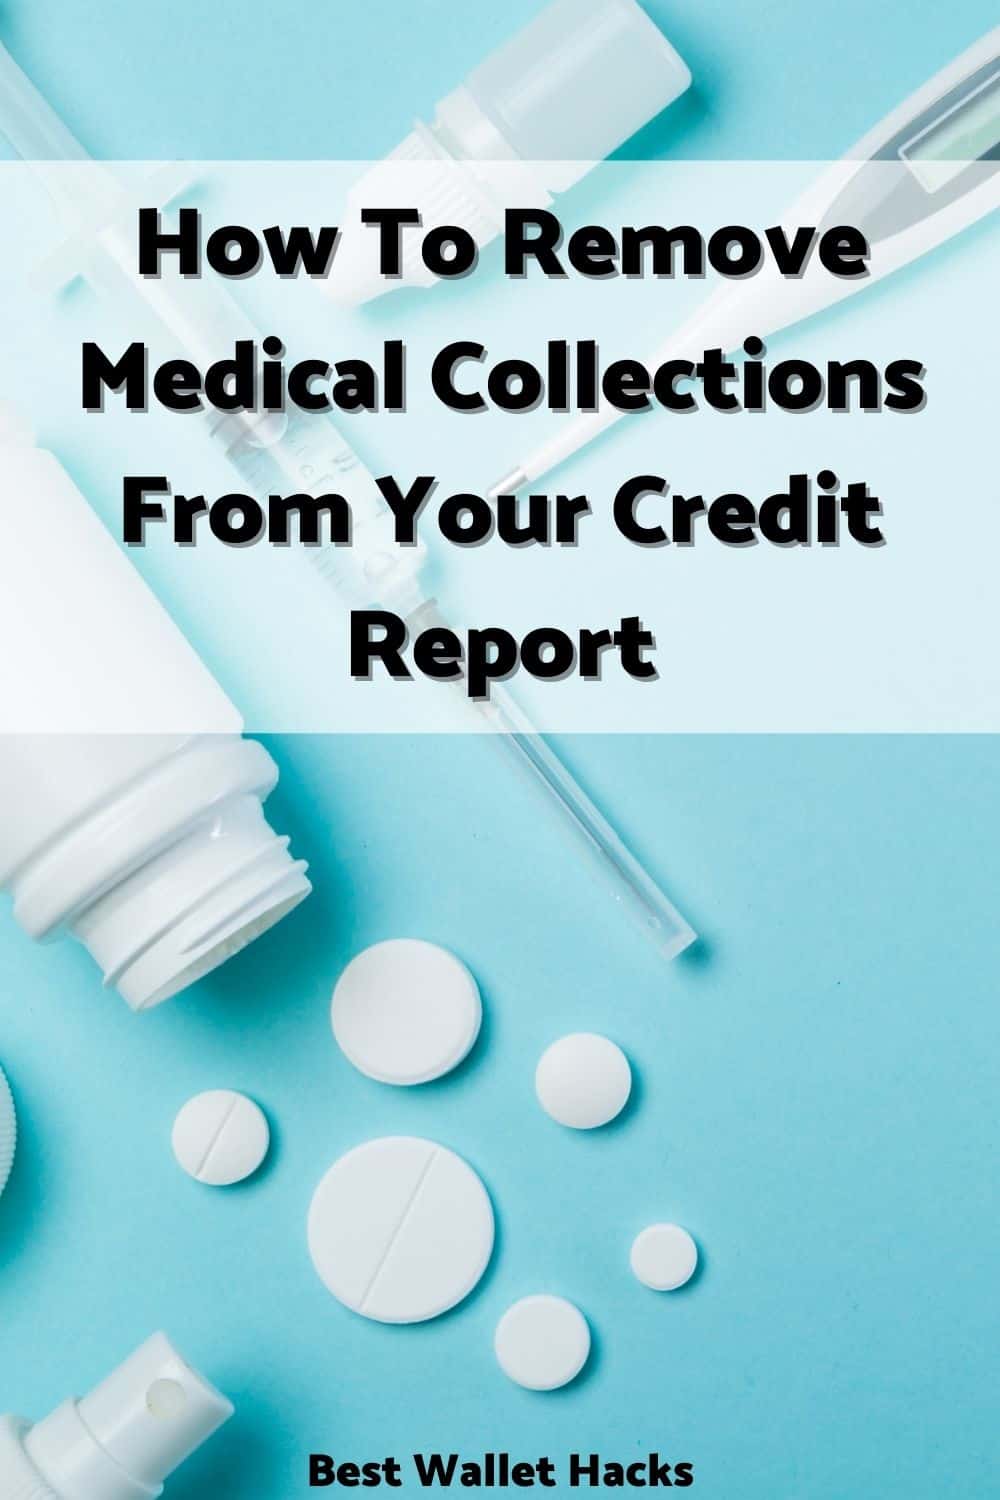 How To Remove Medical Collections From Your Credit Report